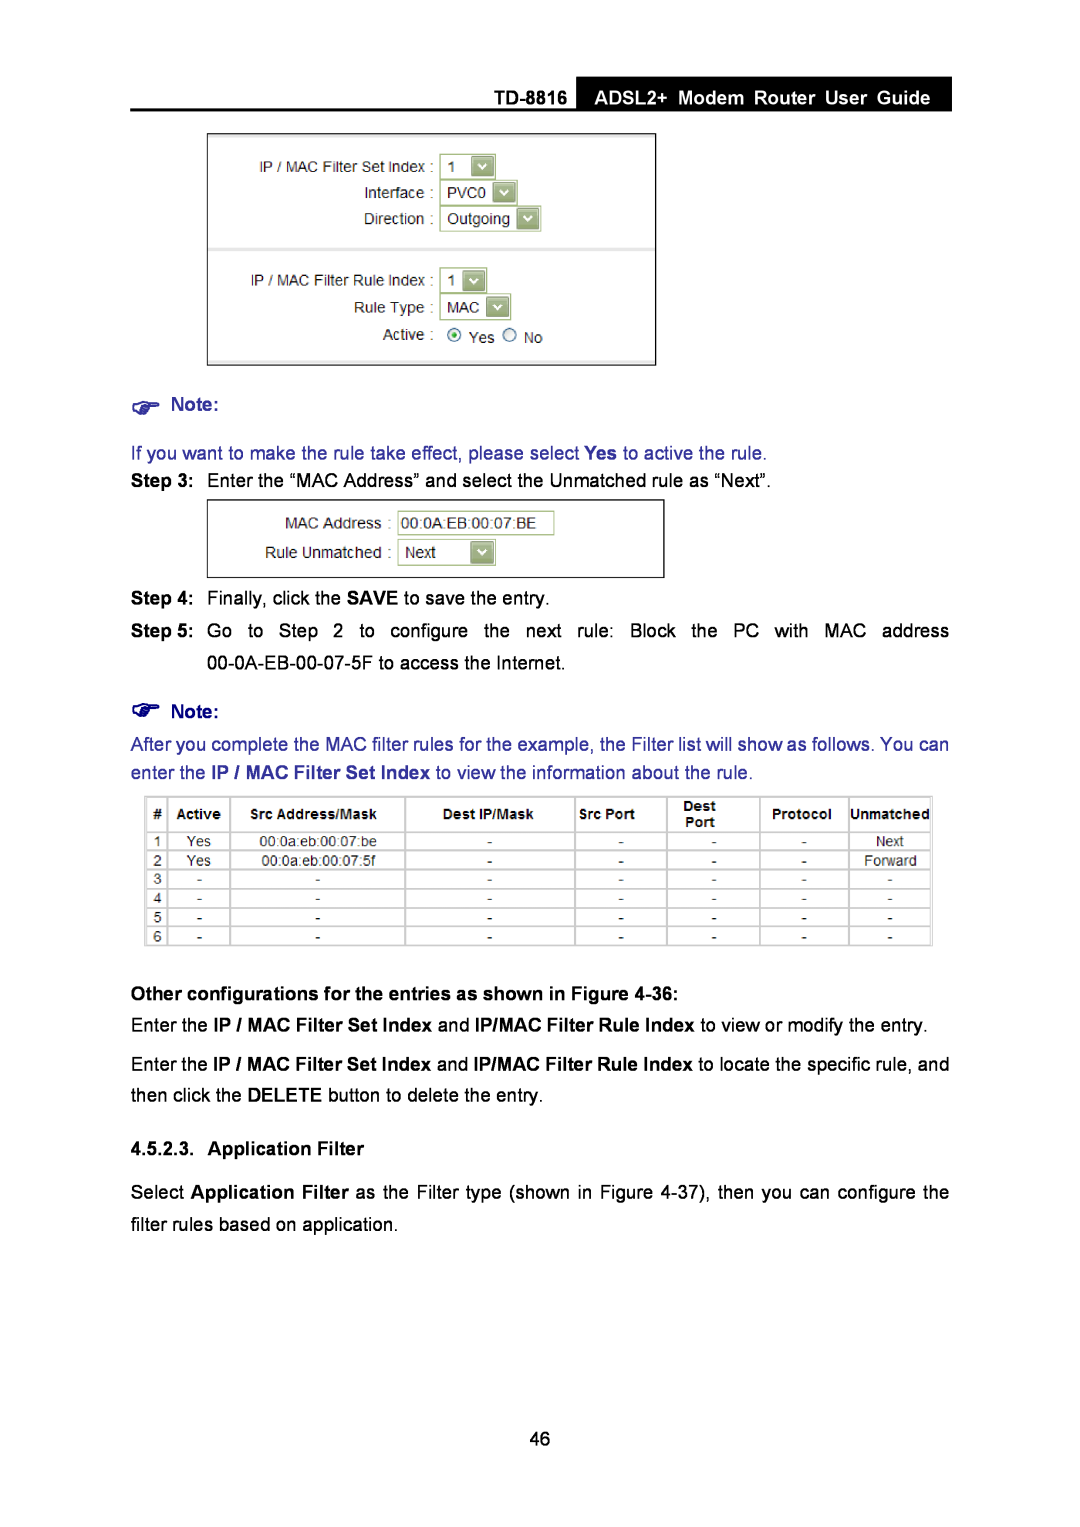 TP-Link TD-8816 manual ADSL2+ Modem Router User Guide,  Note, Other configurations for the entries as shown in Figure 